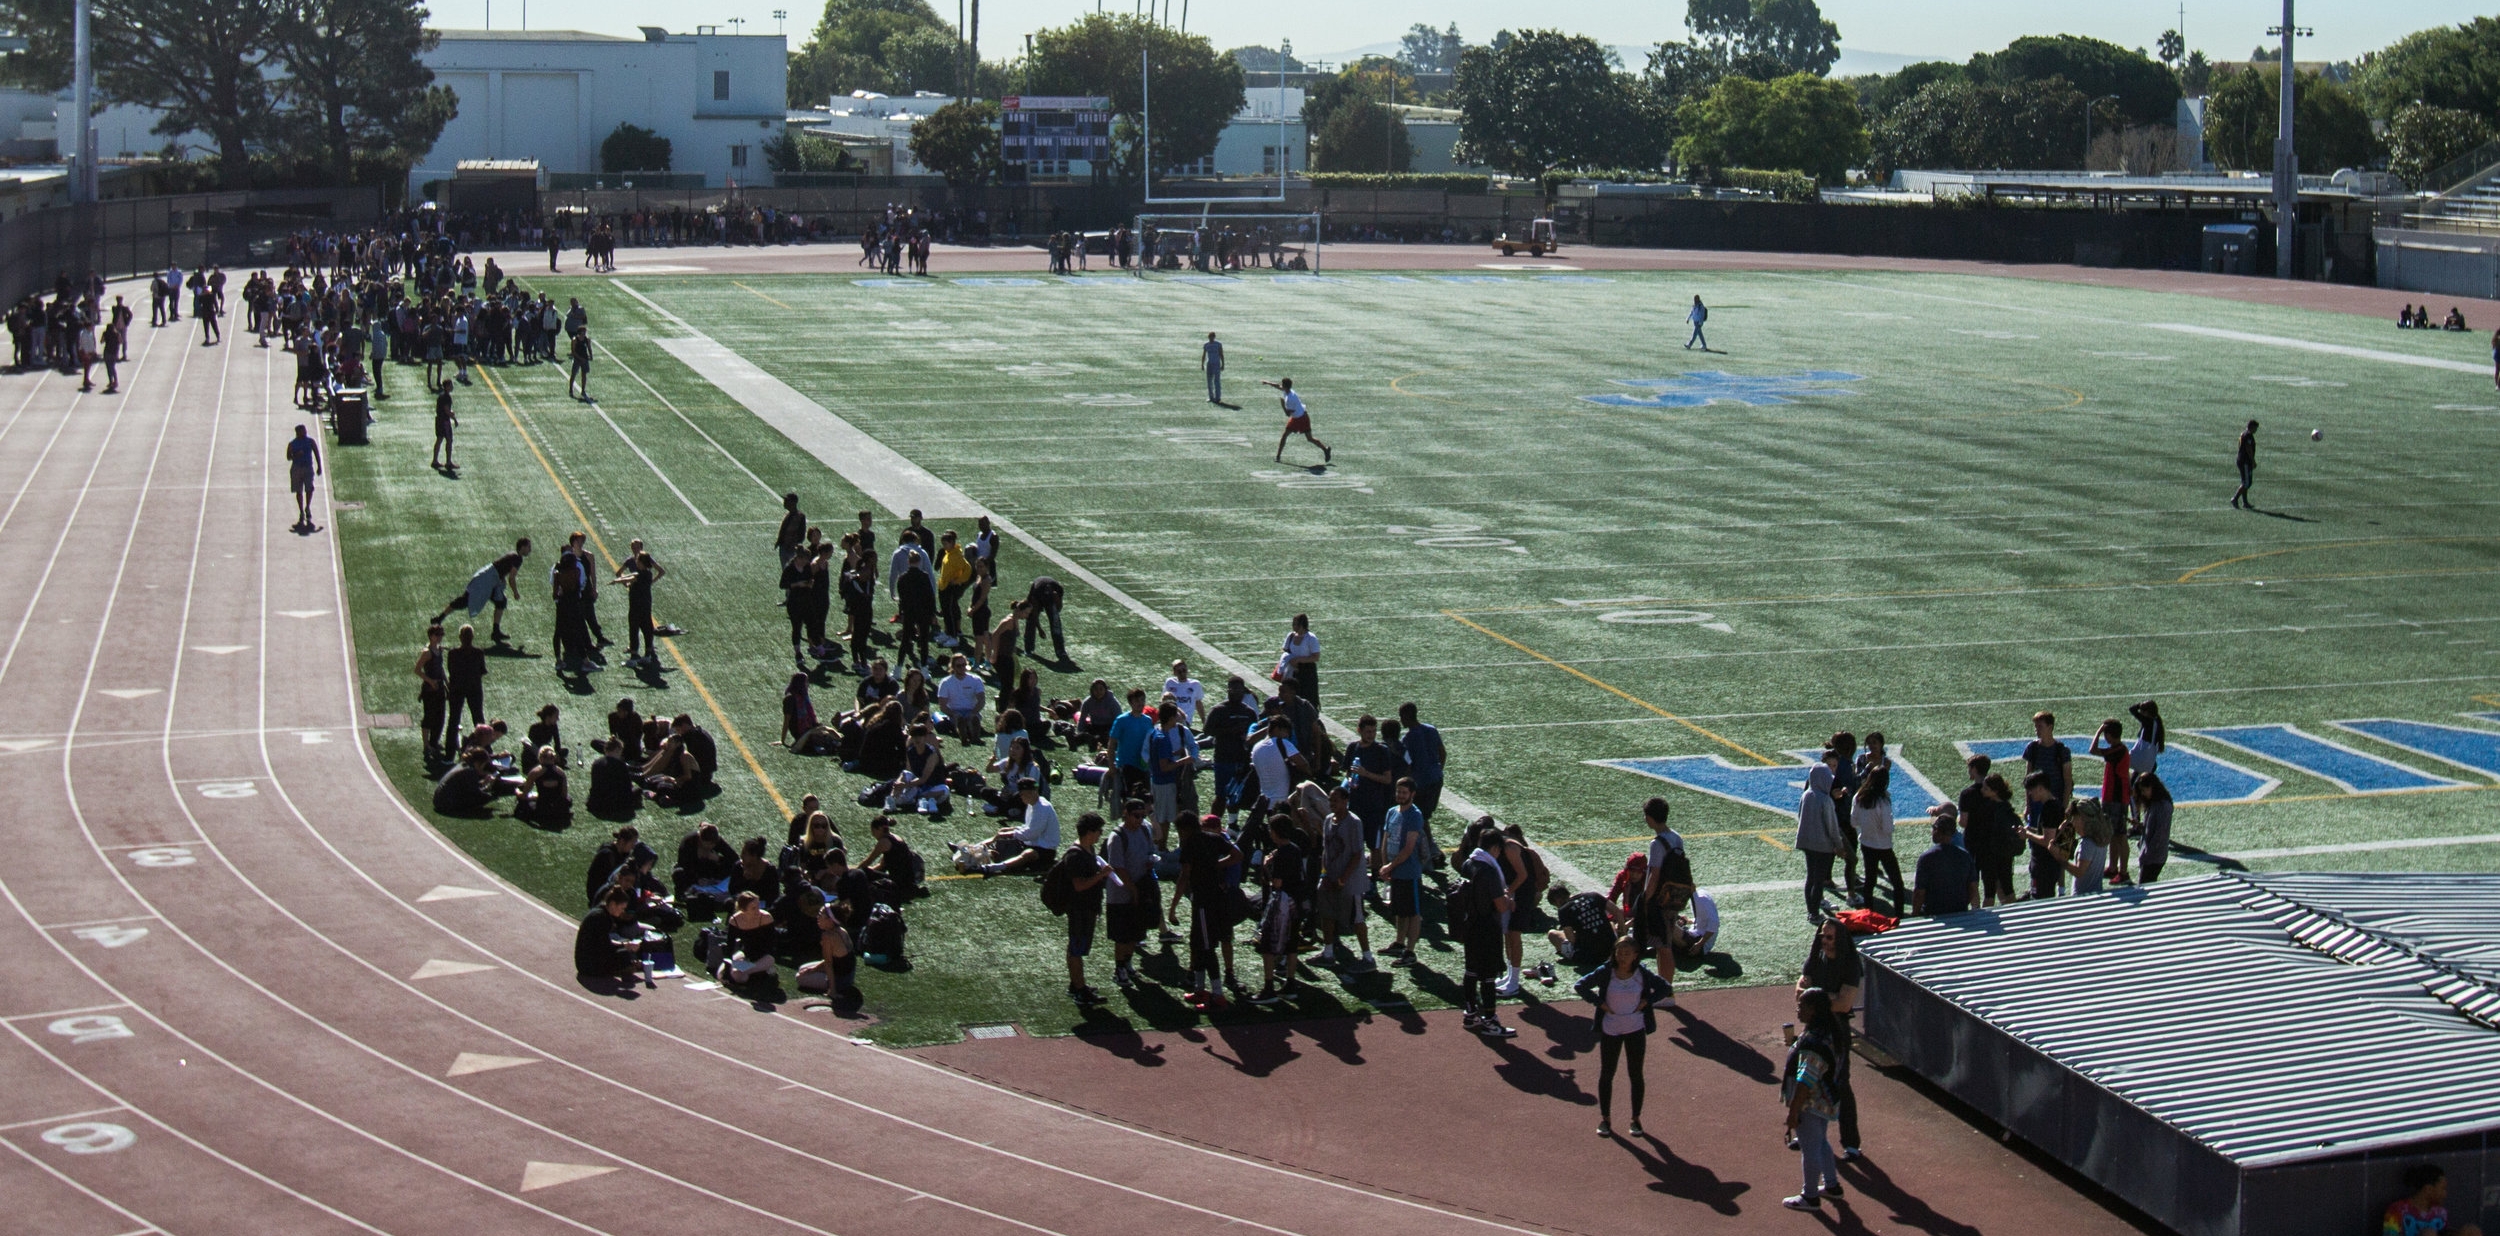  Students outside on the Corsair Field in Santa Monica College in their designated emergency positions after the alarm went off during the Earthquake Shakeout Drill on Thursday October 18, 2018 in Santa Monica, California. (Jacob Victorica/Corsiar Ph